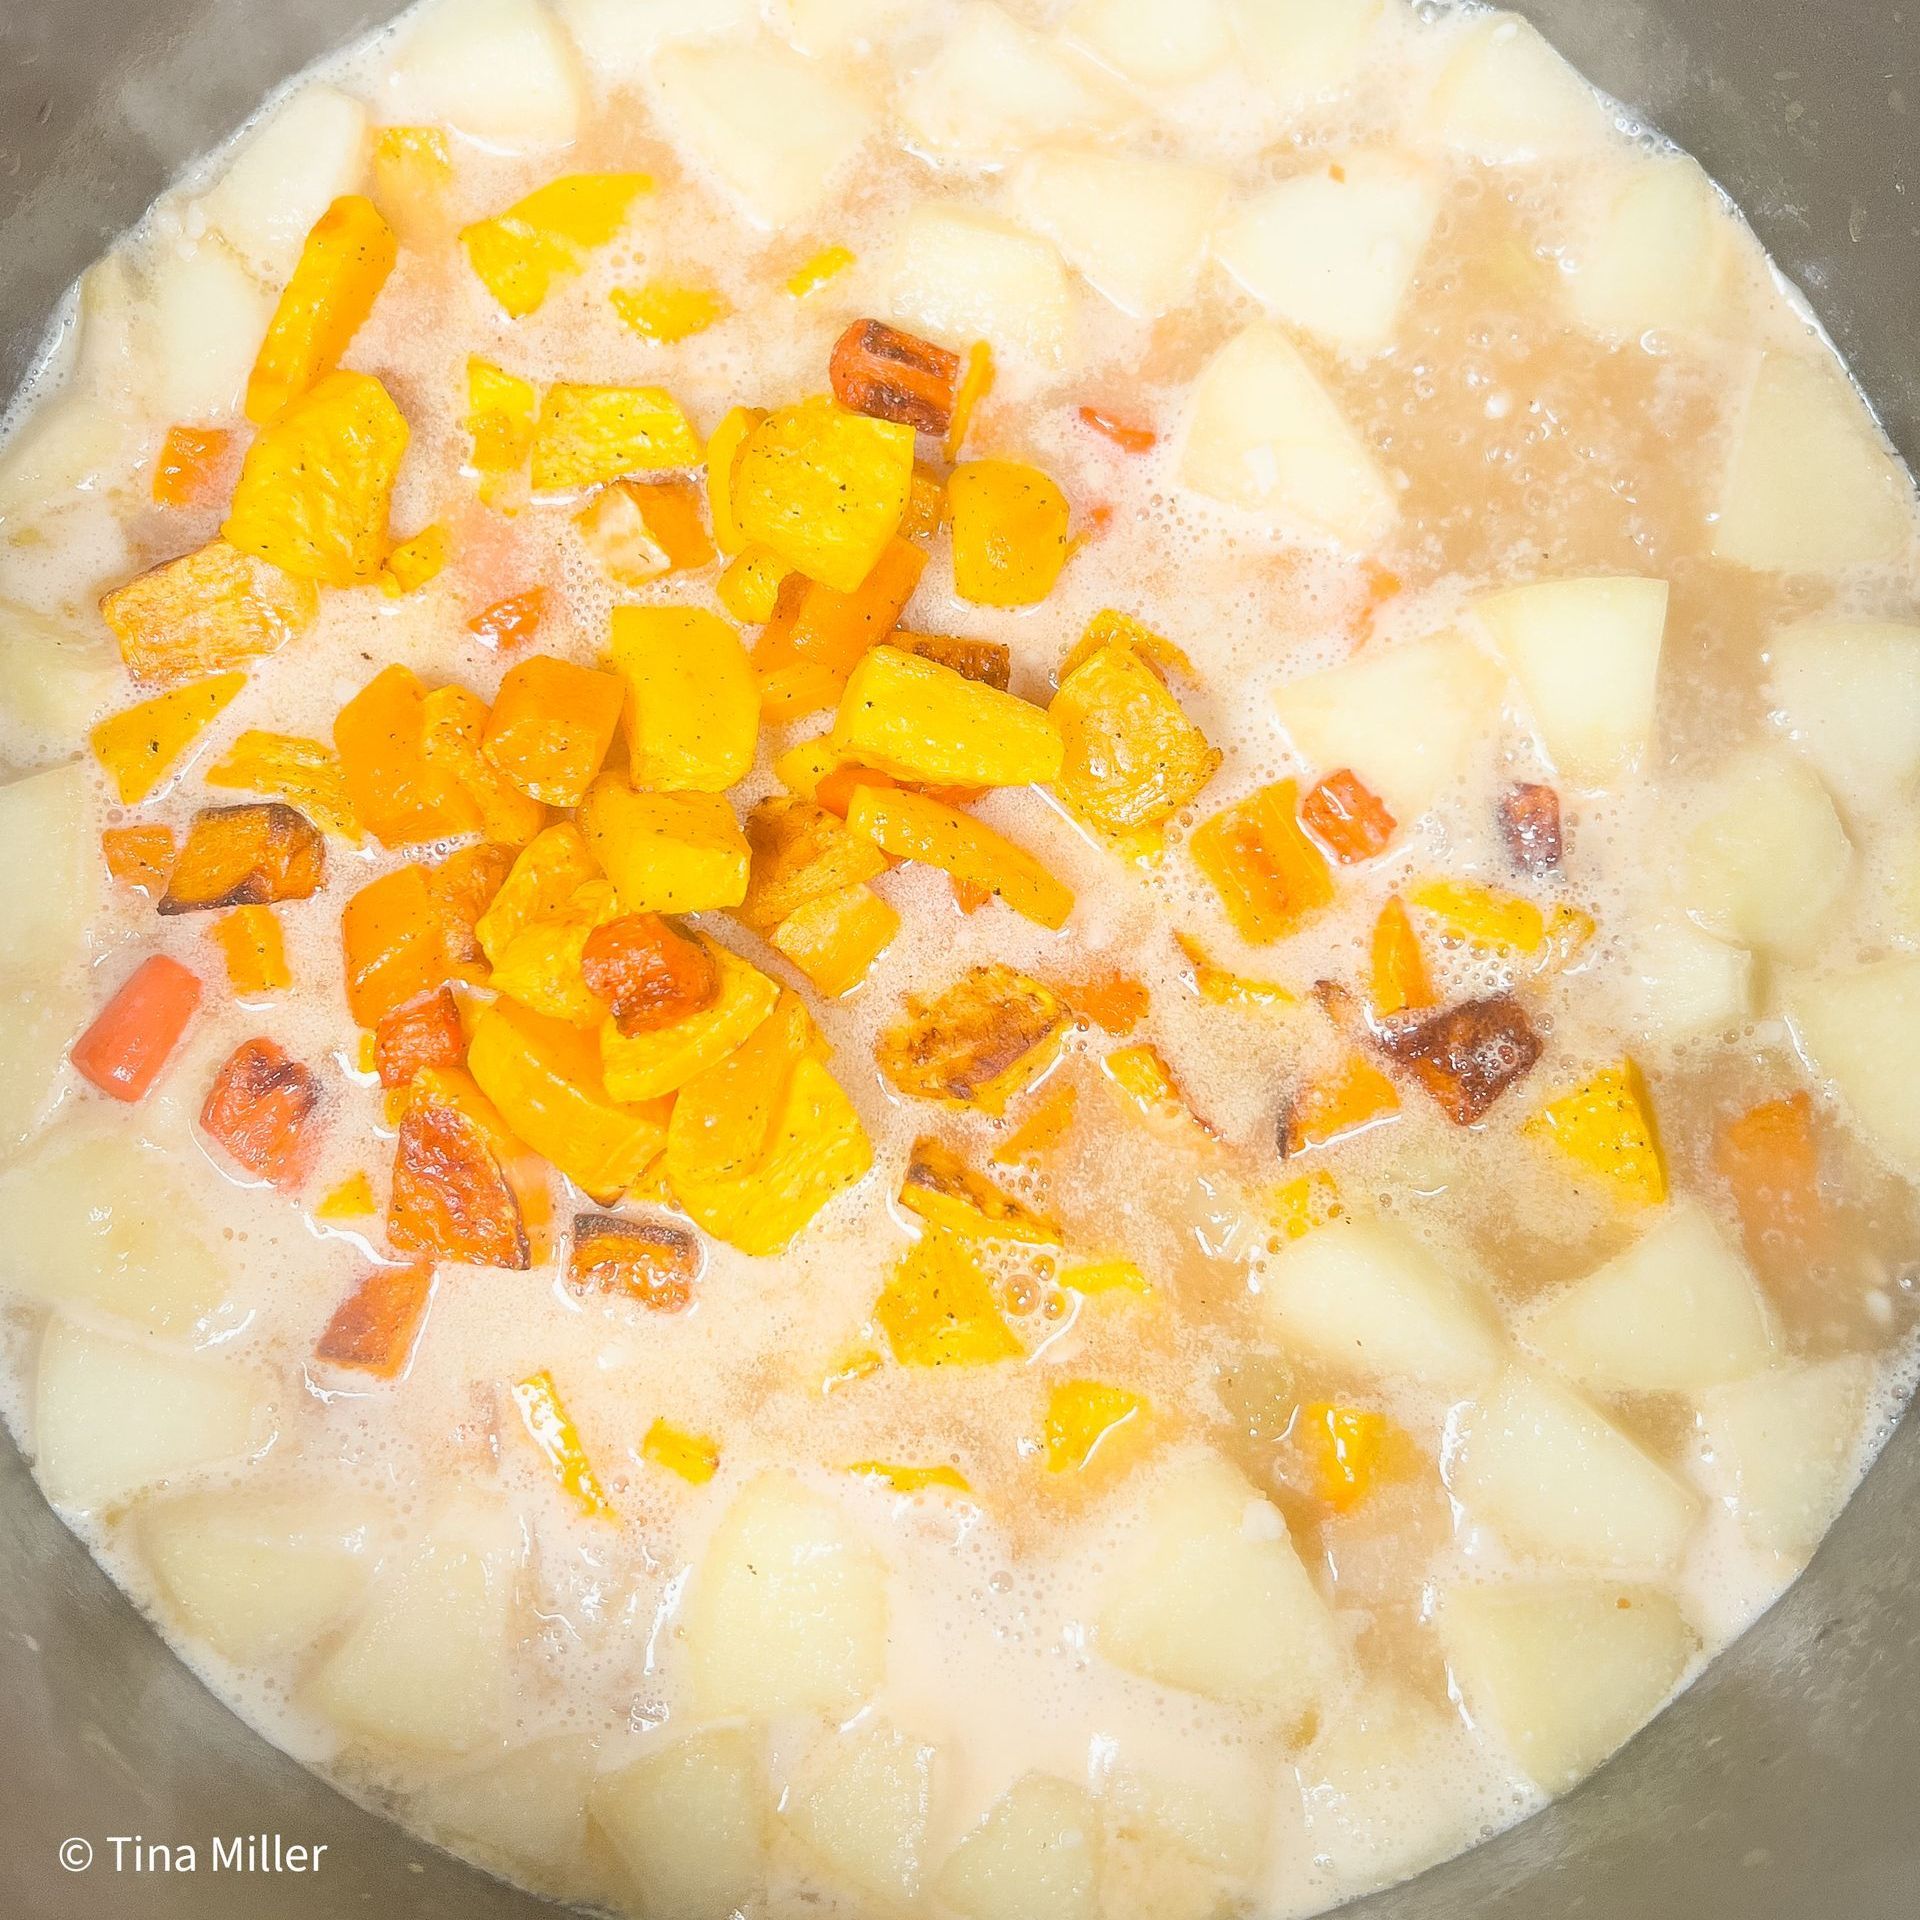 Apples and roasted squash and carrots in Dutch oven simmering in vegetable broth and coconut milk.